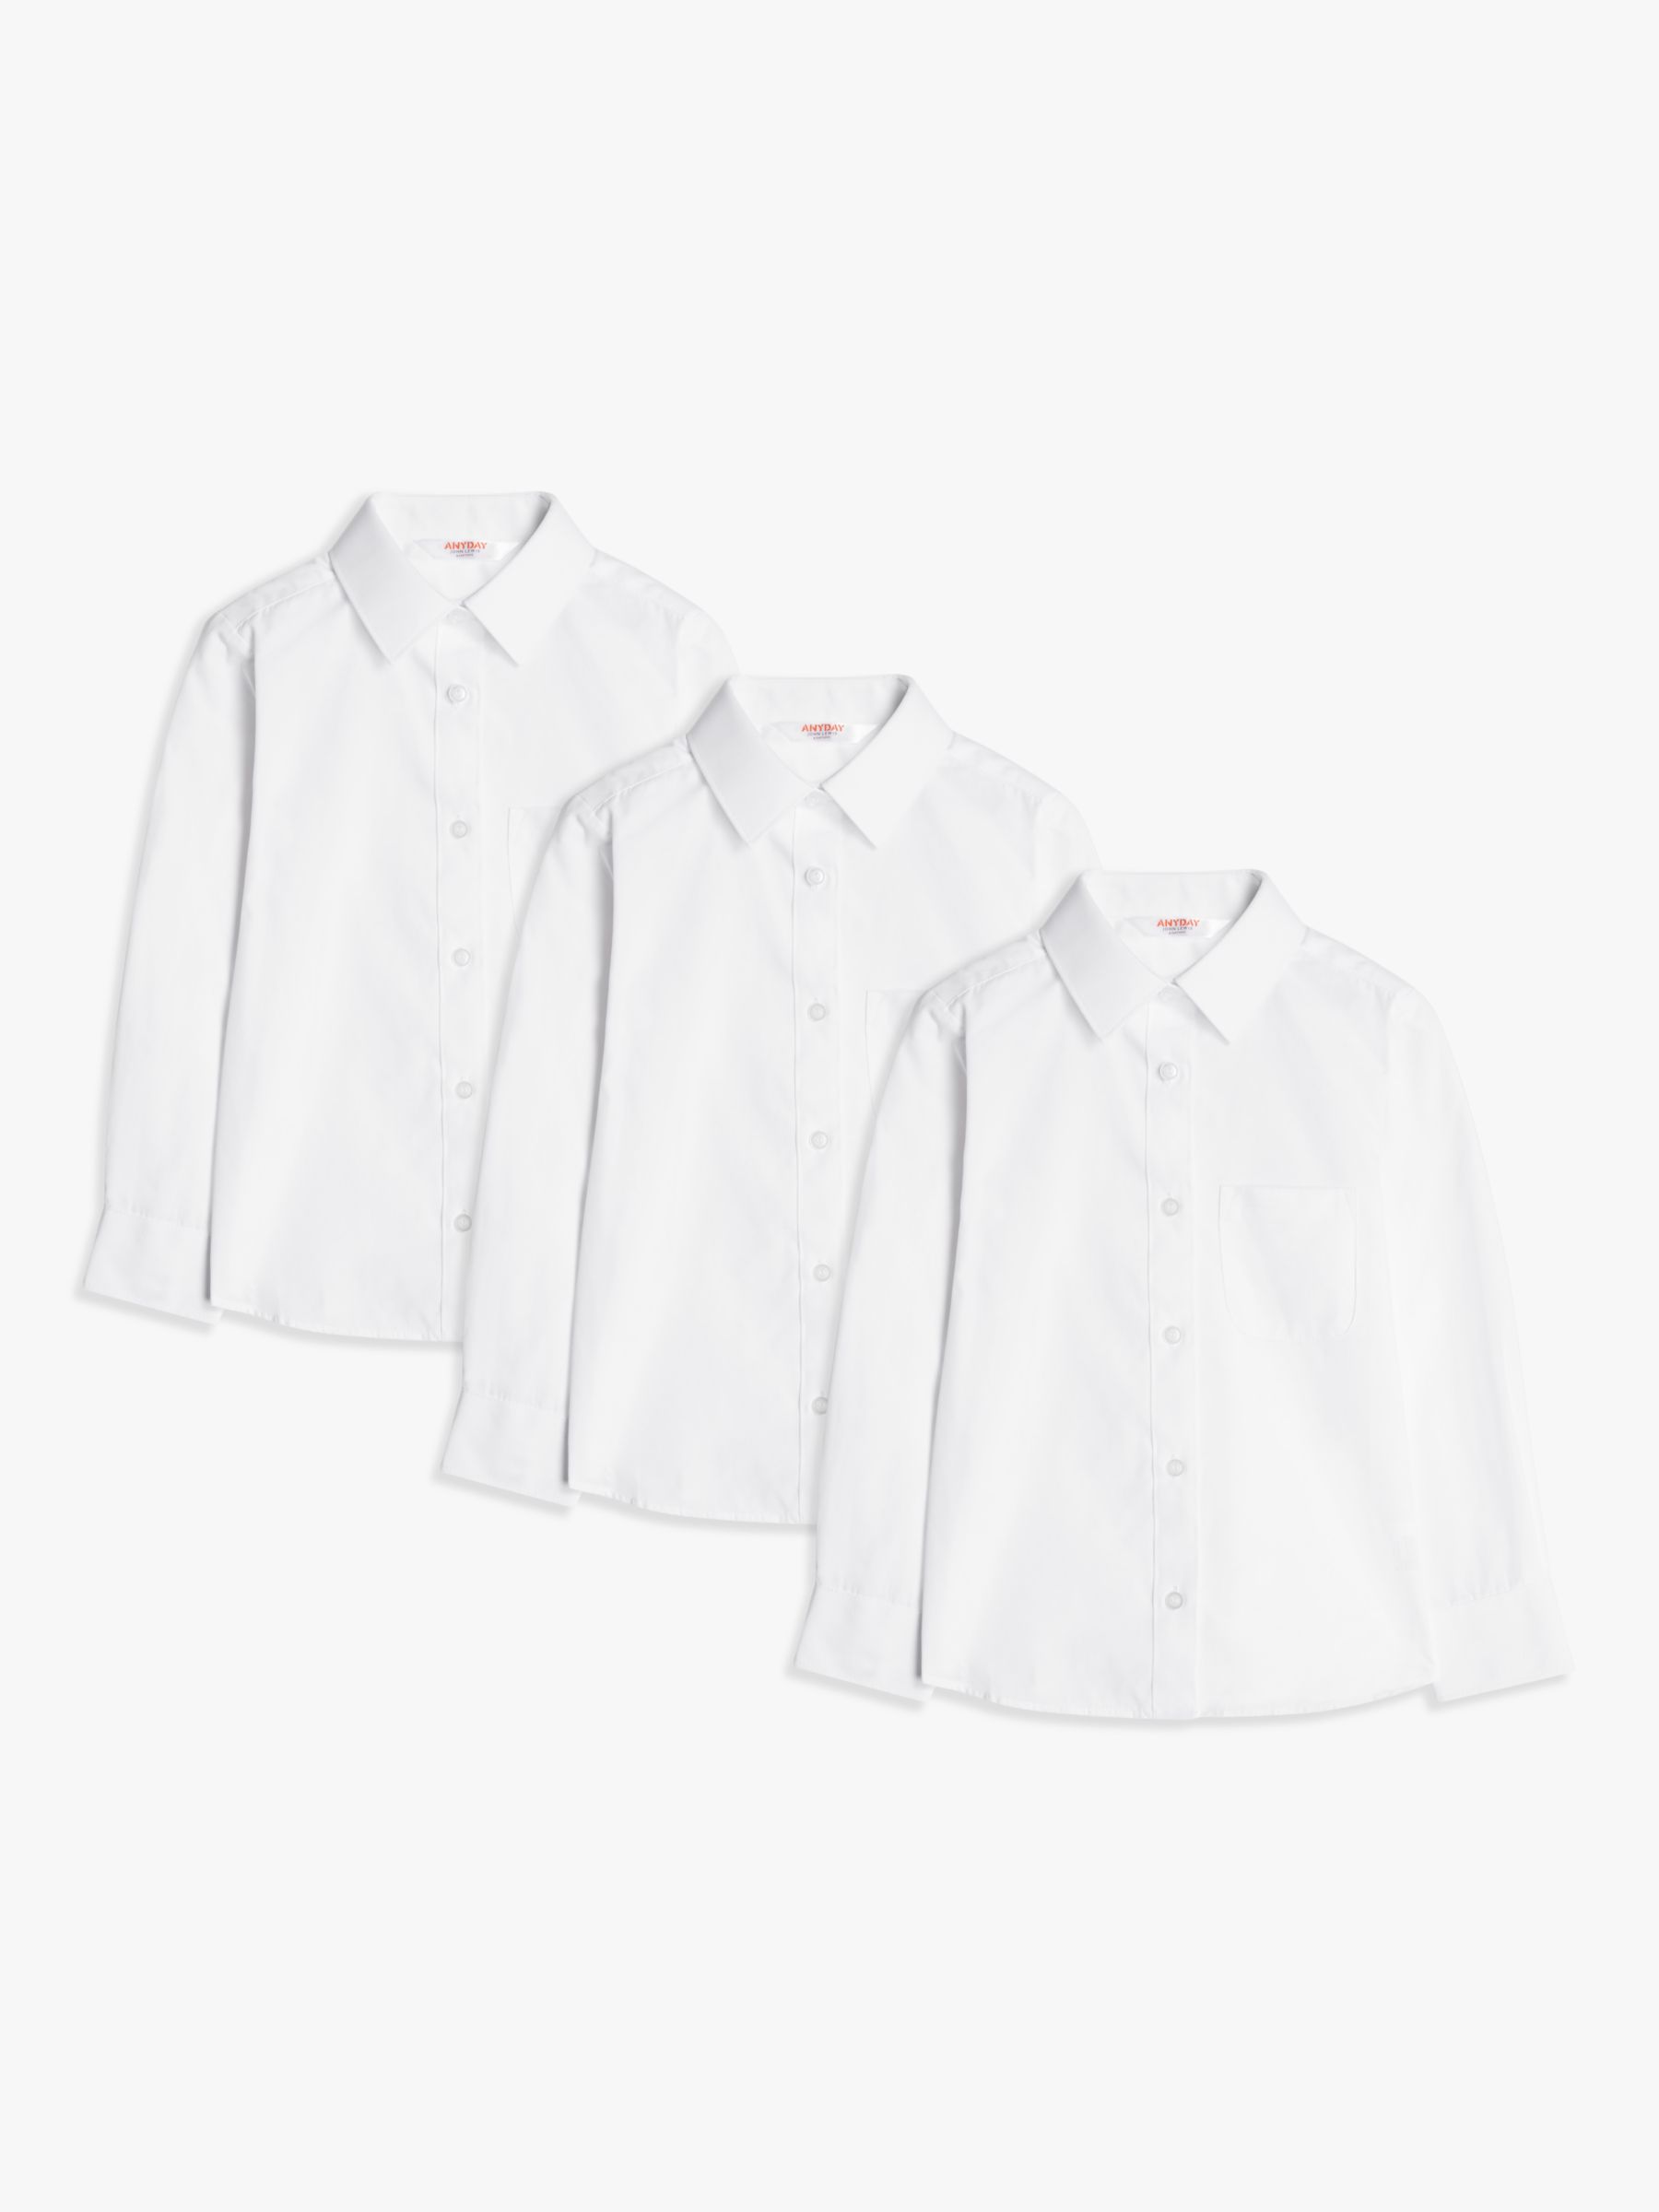 Buy John Lewis ANYDAY Girls' Long Sleeved Blouse, Pack of 3, White Online at johnlewis.com